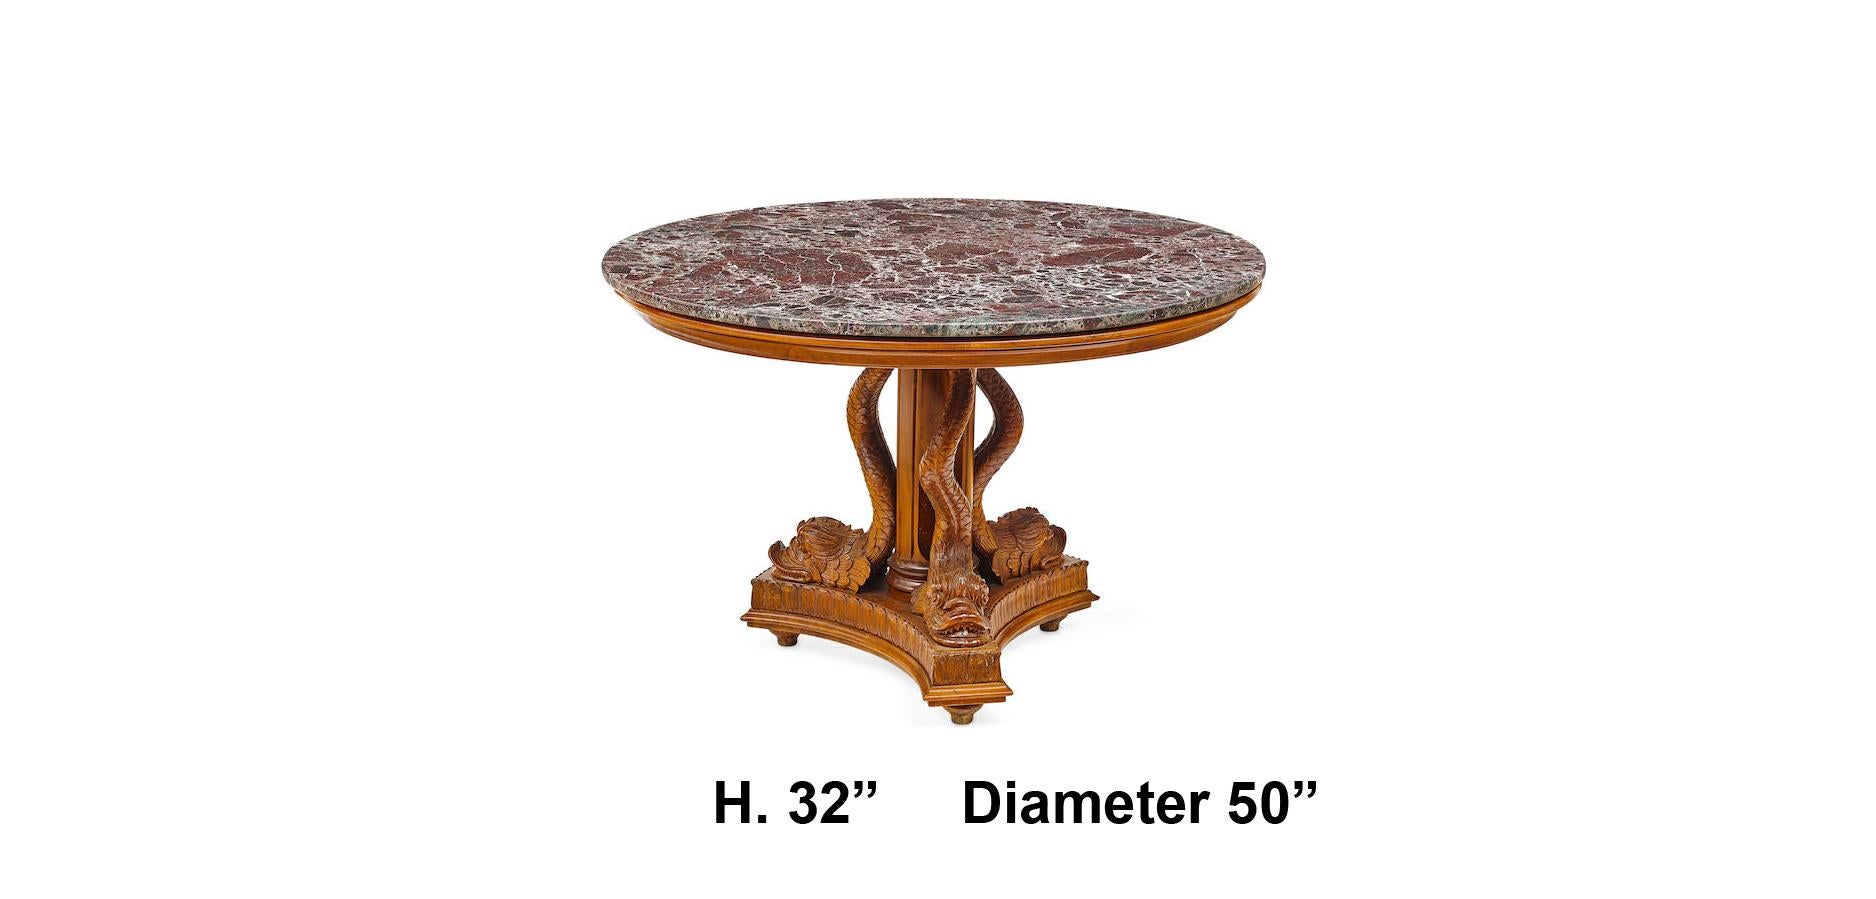 Fabulous 19th century Italian neoclassical carved walnut dolphin leg round center table with round rouge marble top.
Finely carved walnut dolphins, meticulous attention giving to every detail.